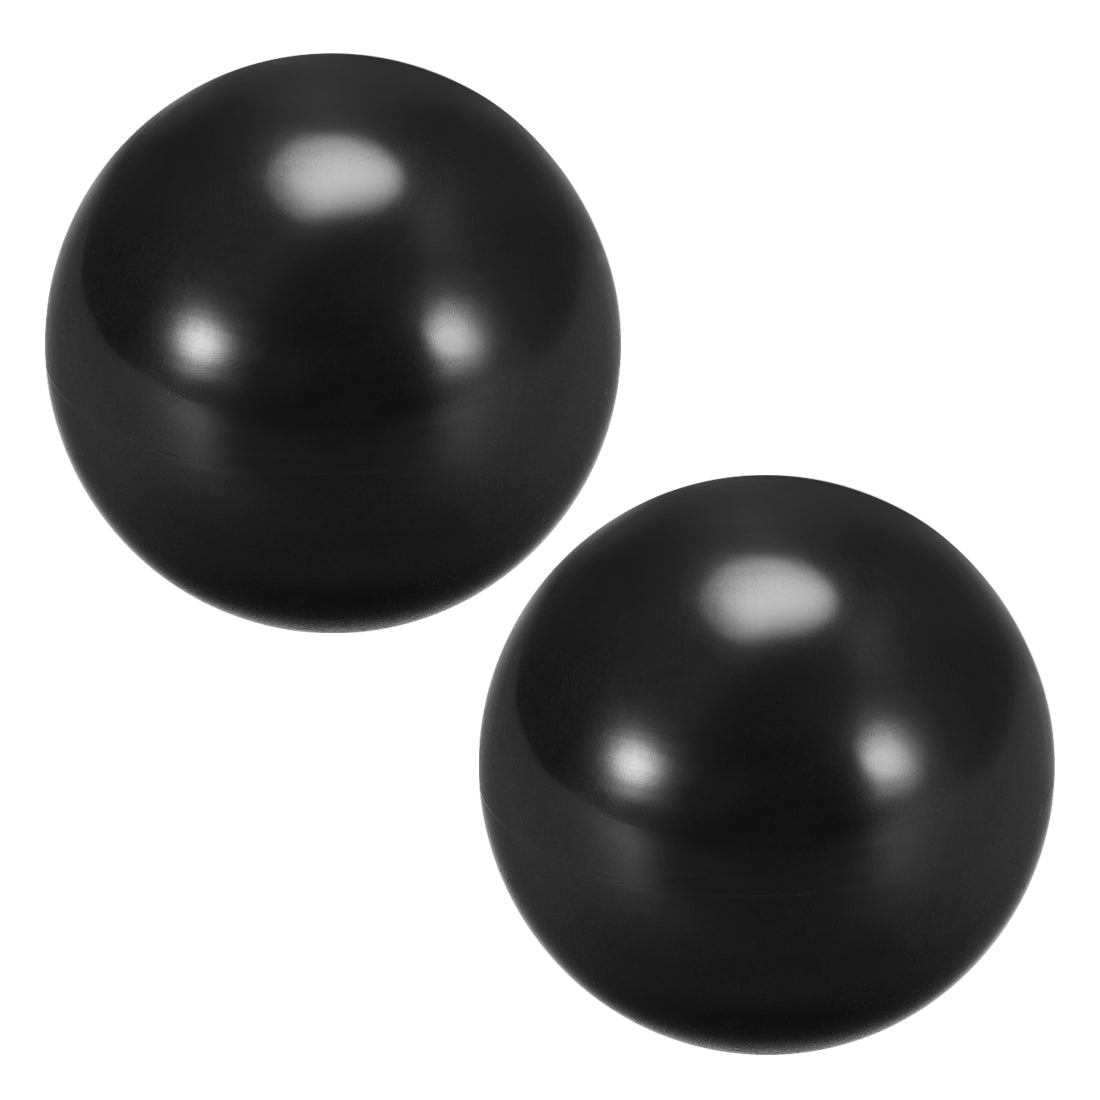 uxcell Uxcell Joystick Ball Top Handle Rocker Round Head Arcade Fighting Game DIY Parts Replacement Black 2Pcs